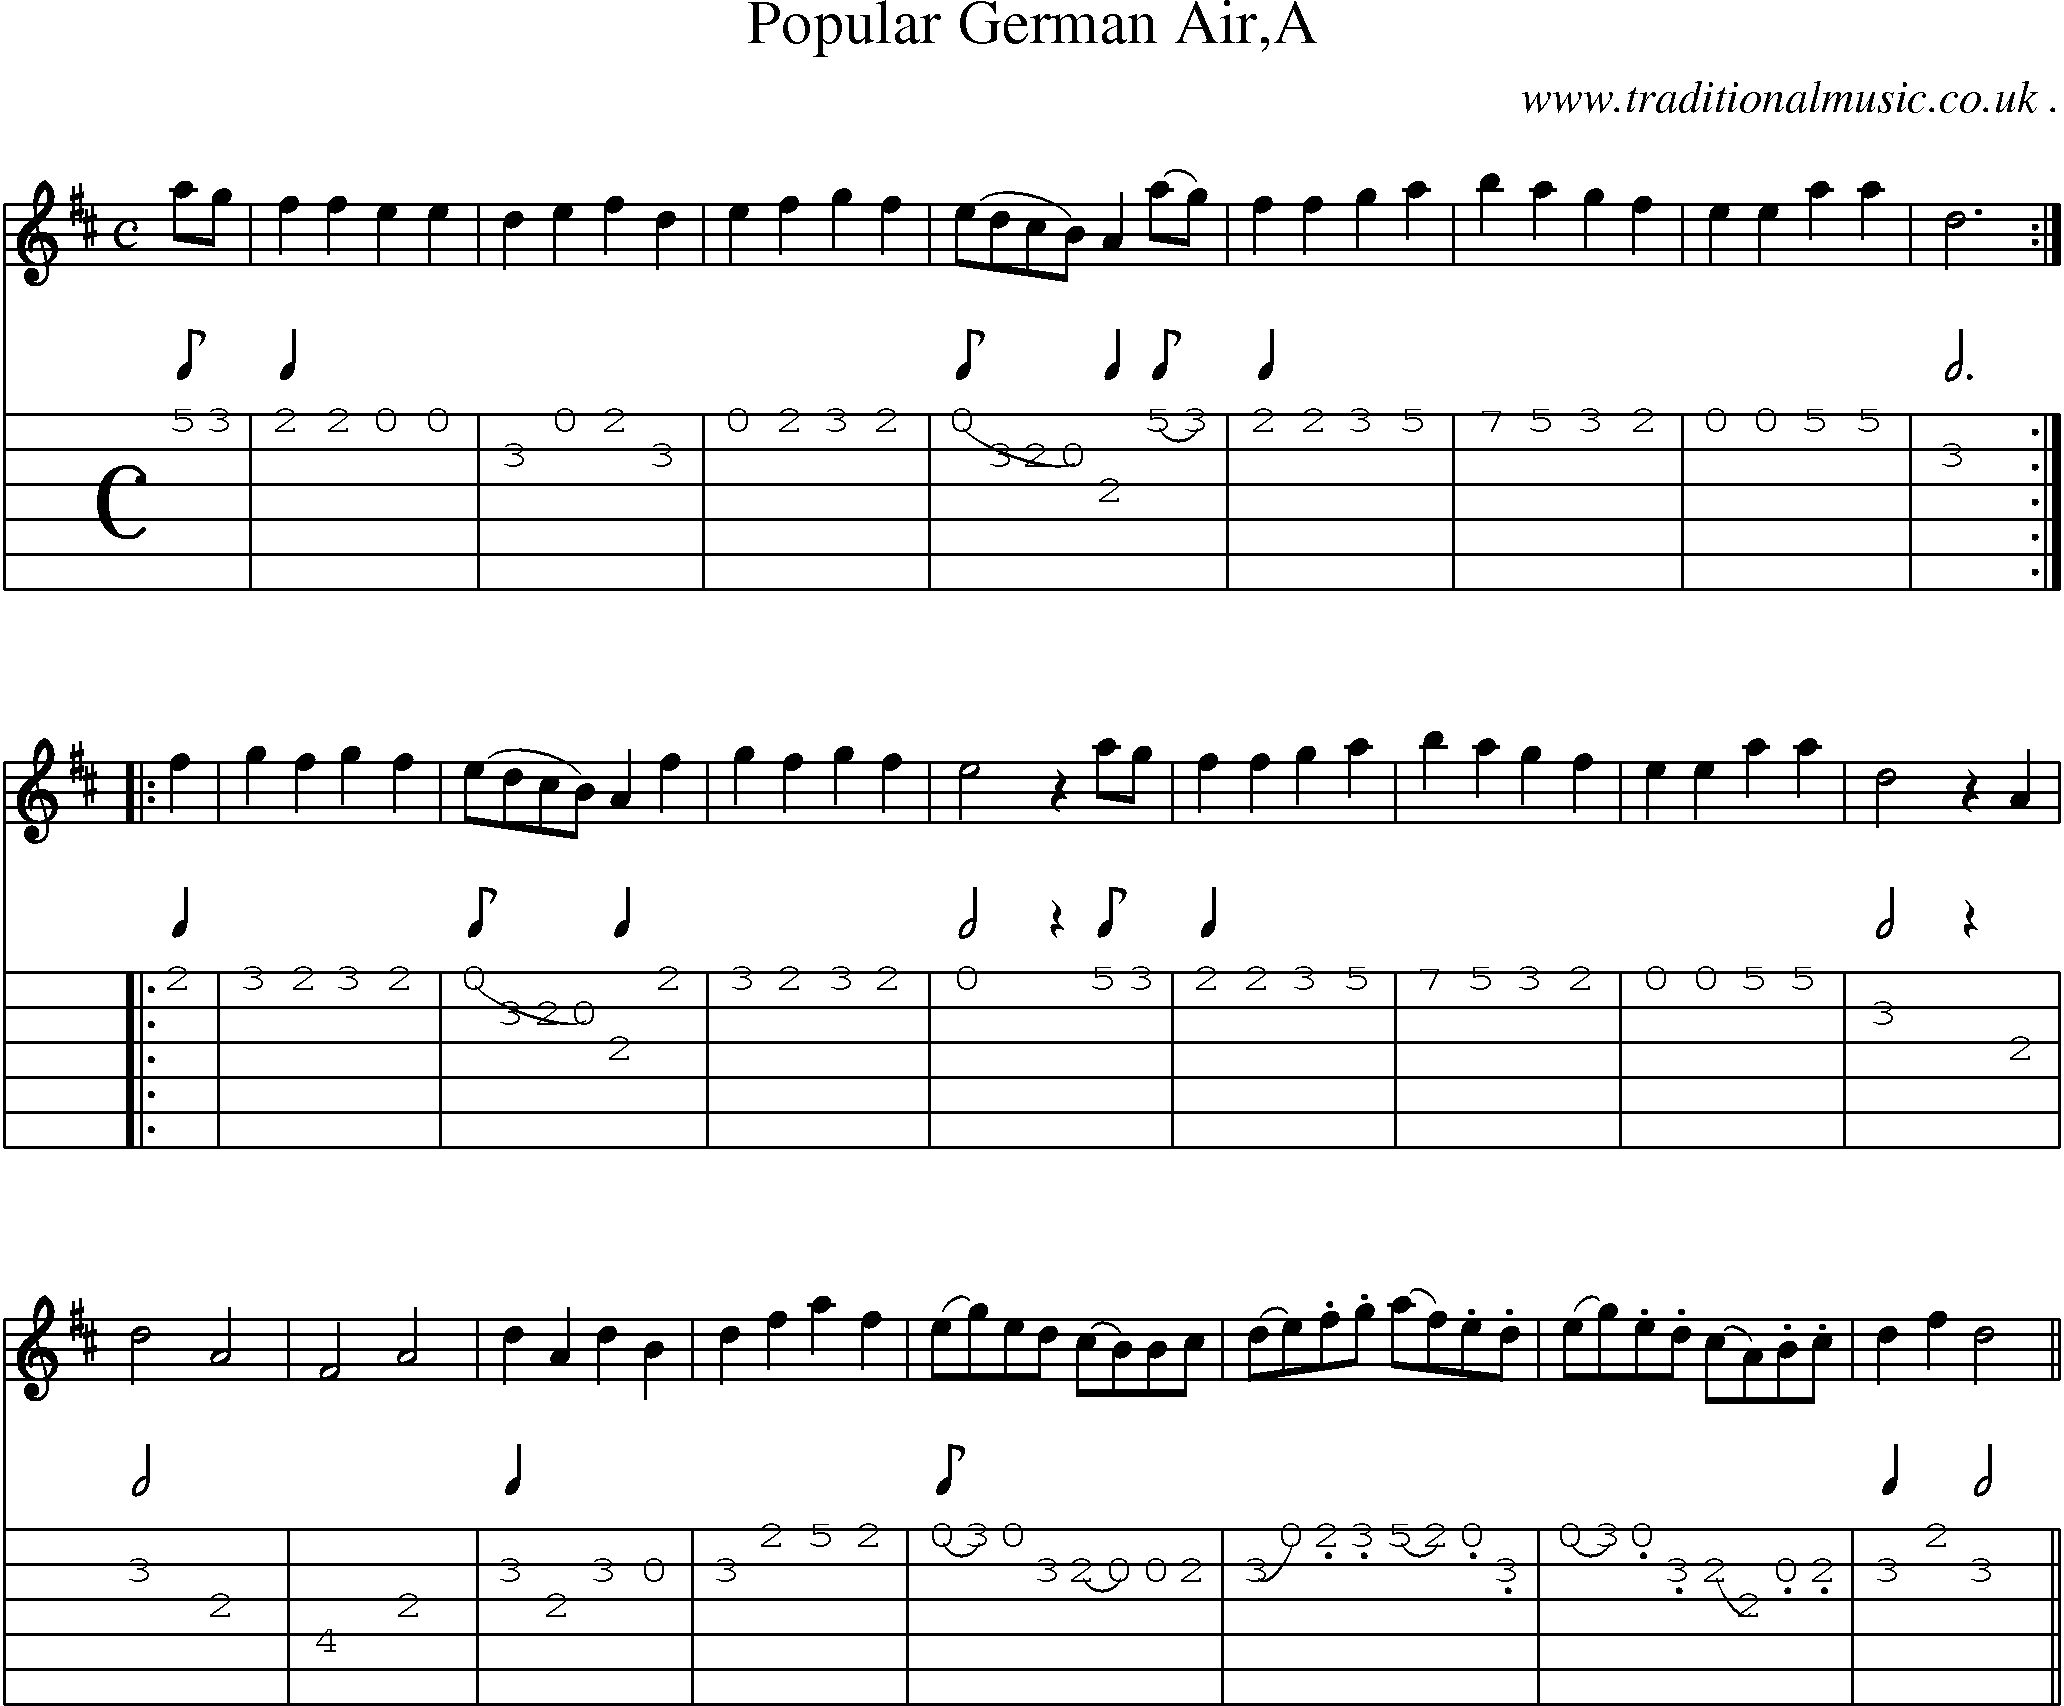 Sheet-Music and Guitar Tabs for Popular German Aira